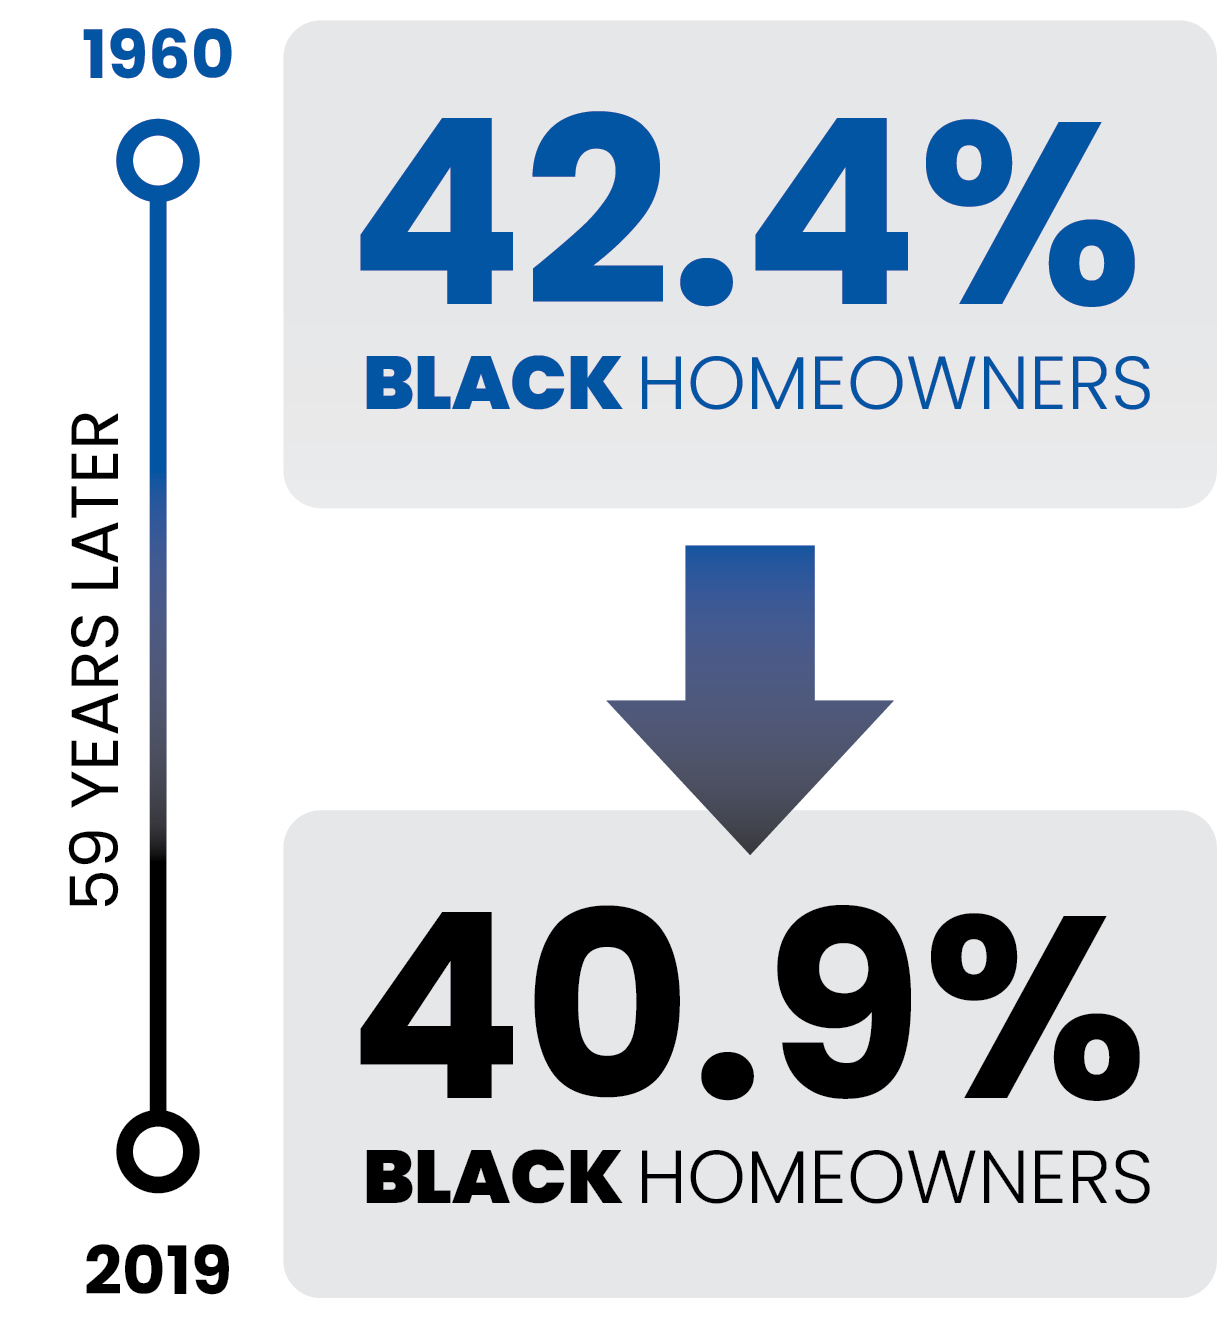 Black homeownership rate in 1960 was 42.4% and has dropped to 40.9% in 2019 after 59 years